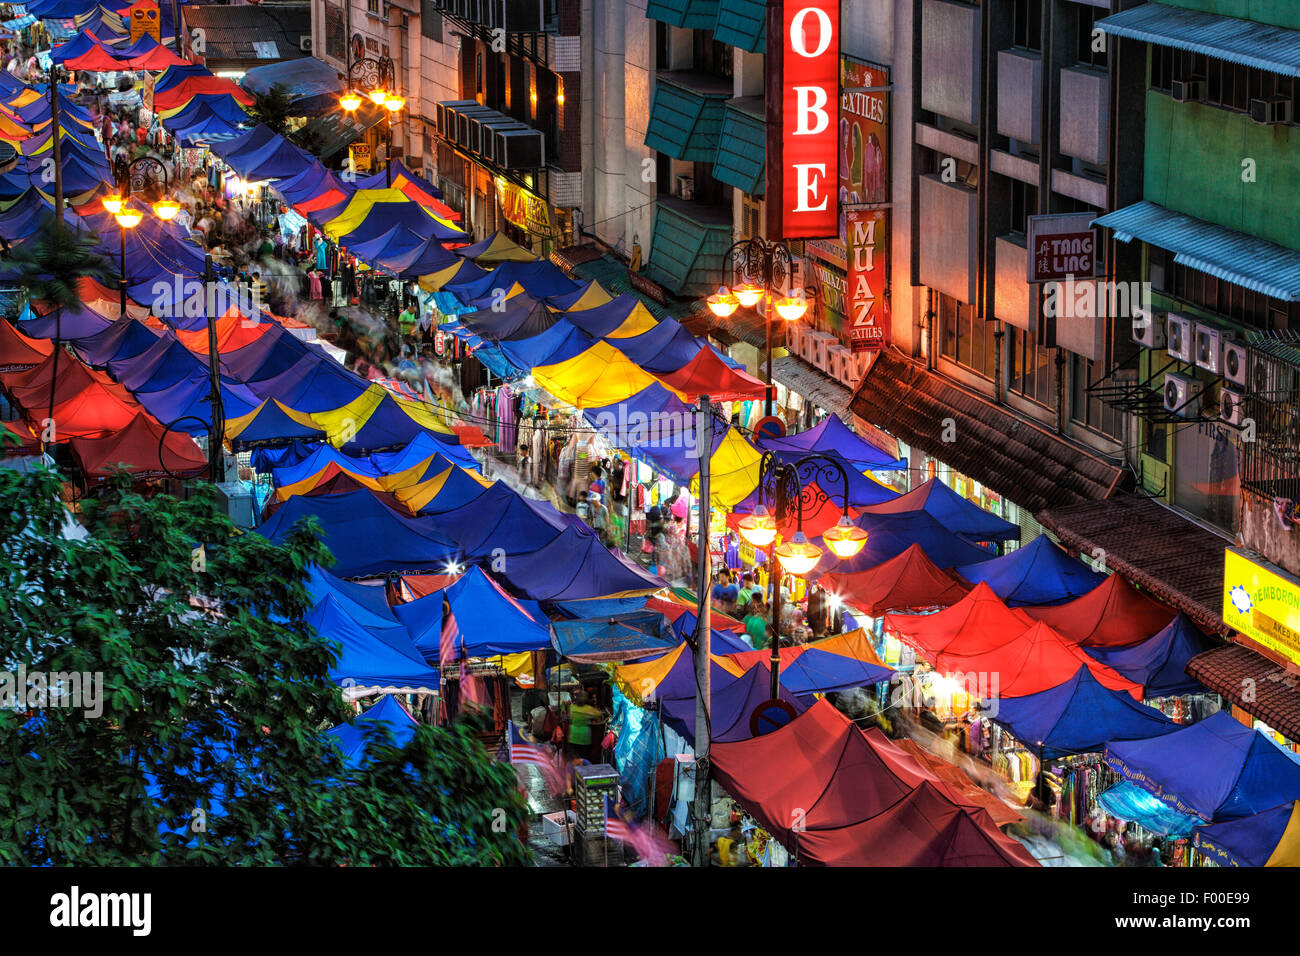 The night market of Kuala Lumpur during the month of Ramadhan. Stock Photo